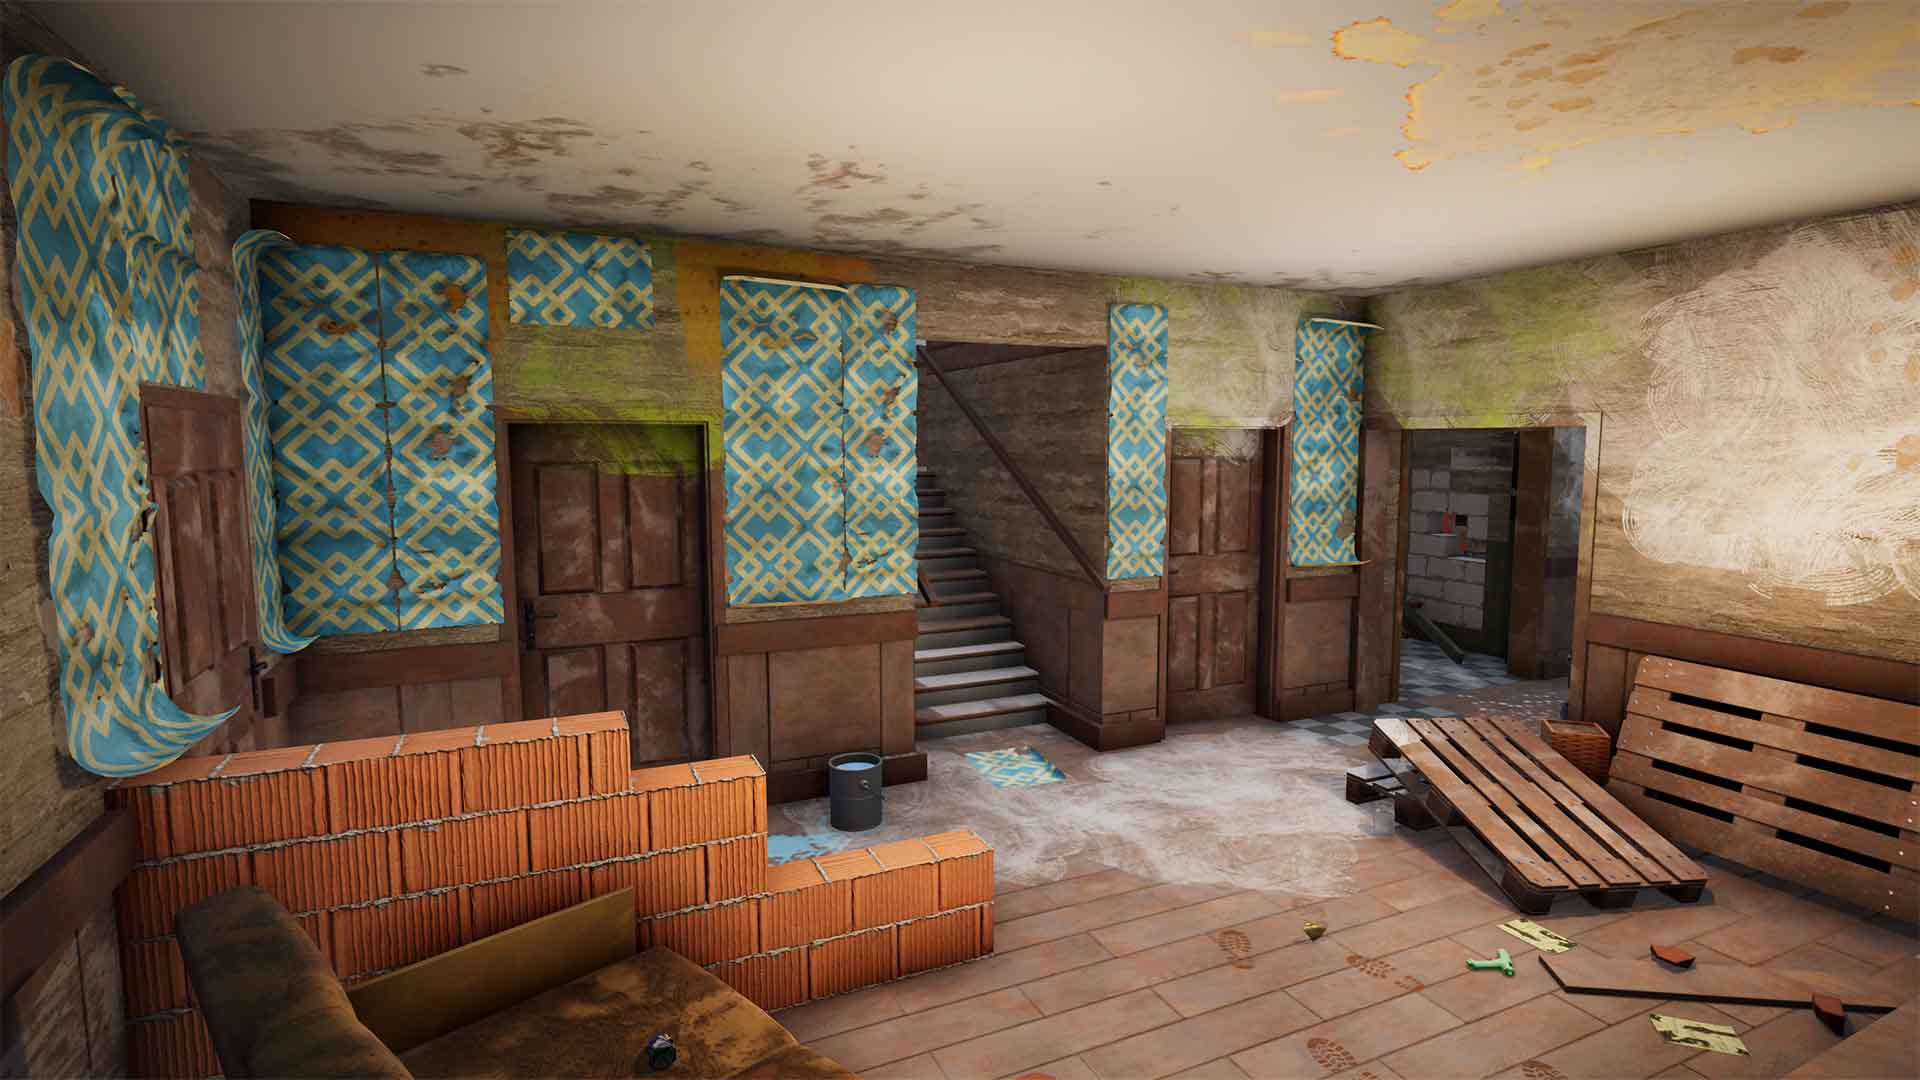 House Flipper 2 trailer shows off story and environment